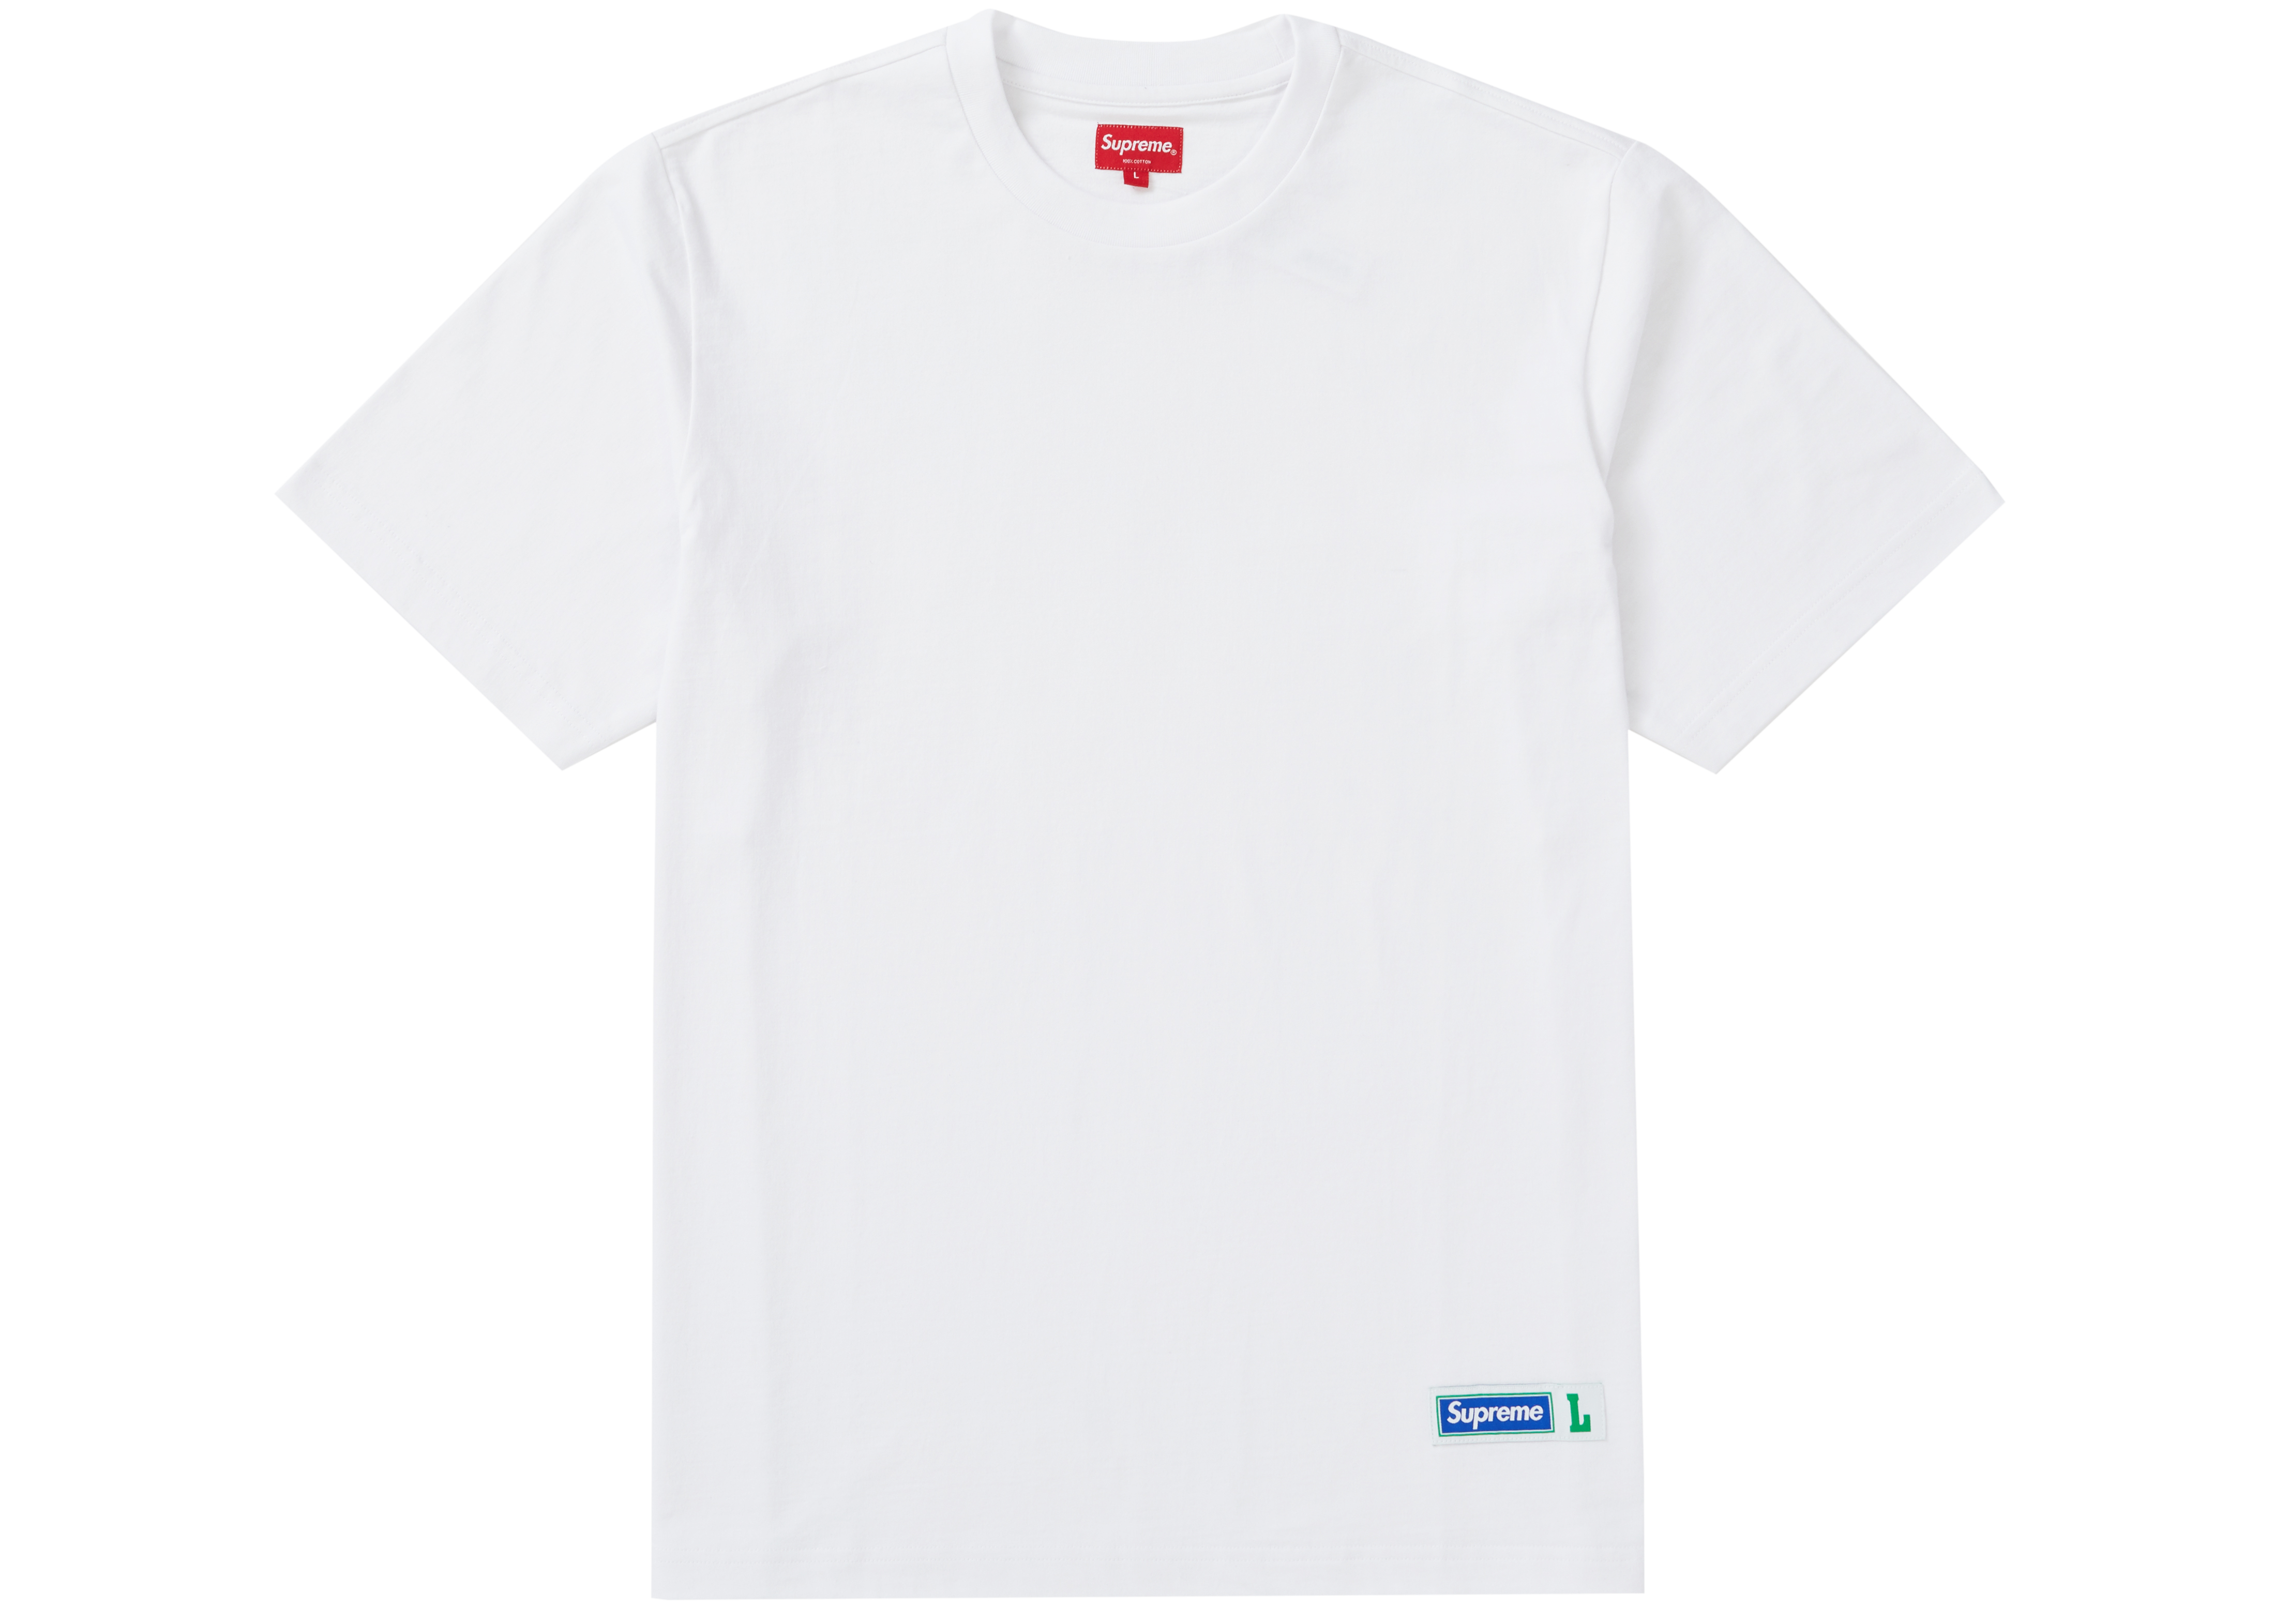 Supreme Athletic Label Tee White Men's - SS19 - US